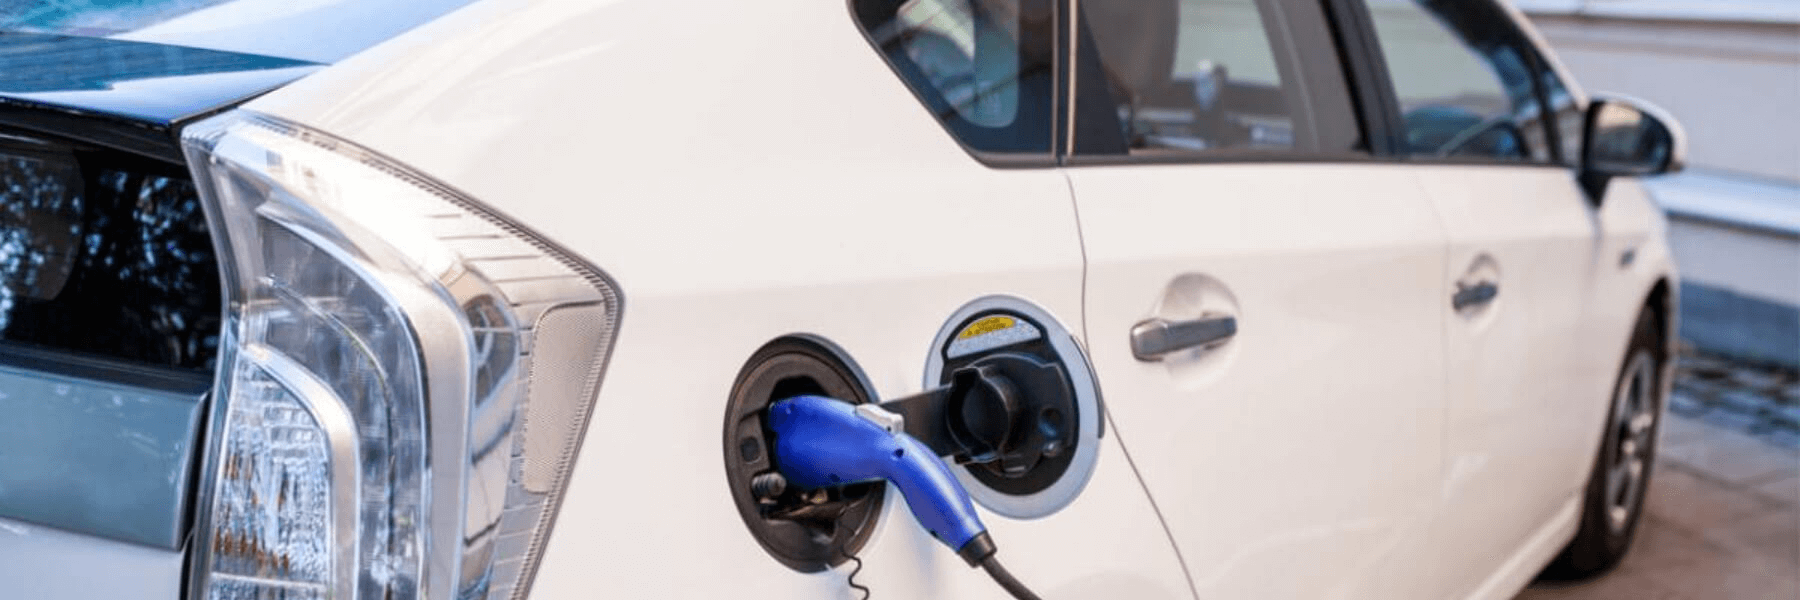 New Oil Pump for Hybrid Electric Vehicles